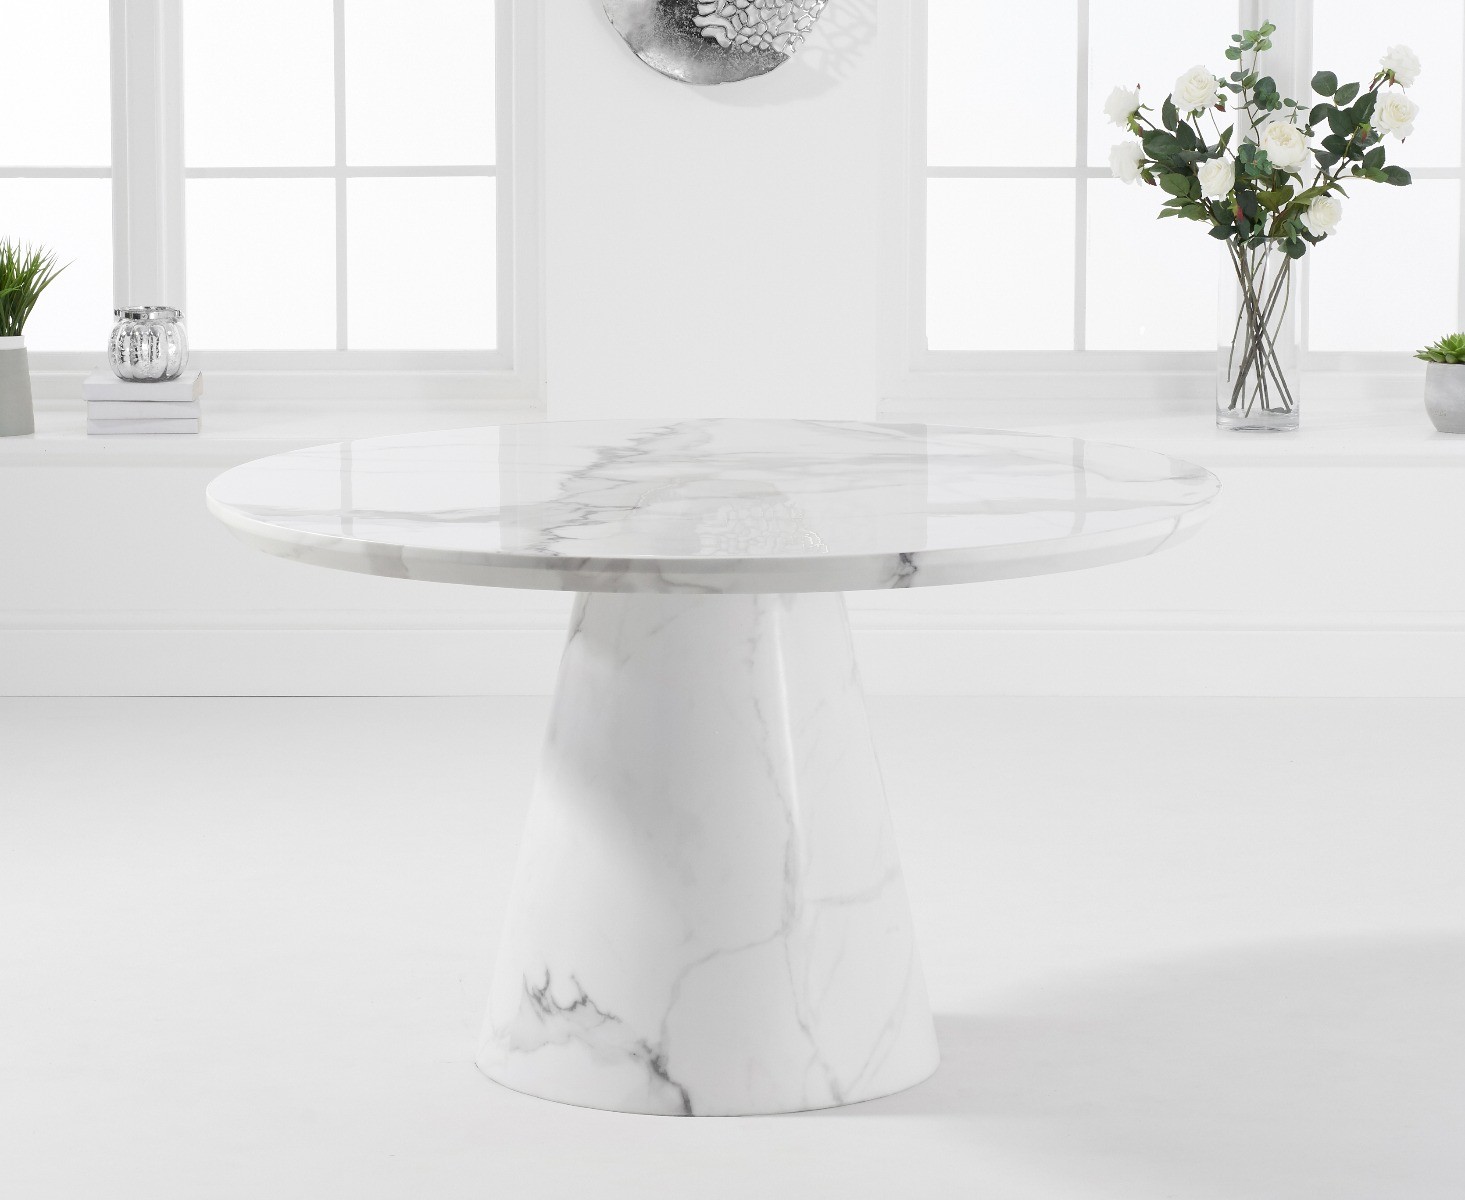 Photo 1 of Ravello 130cm round white marble dining table with 4 grey aldo chairs